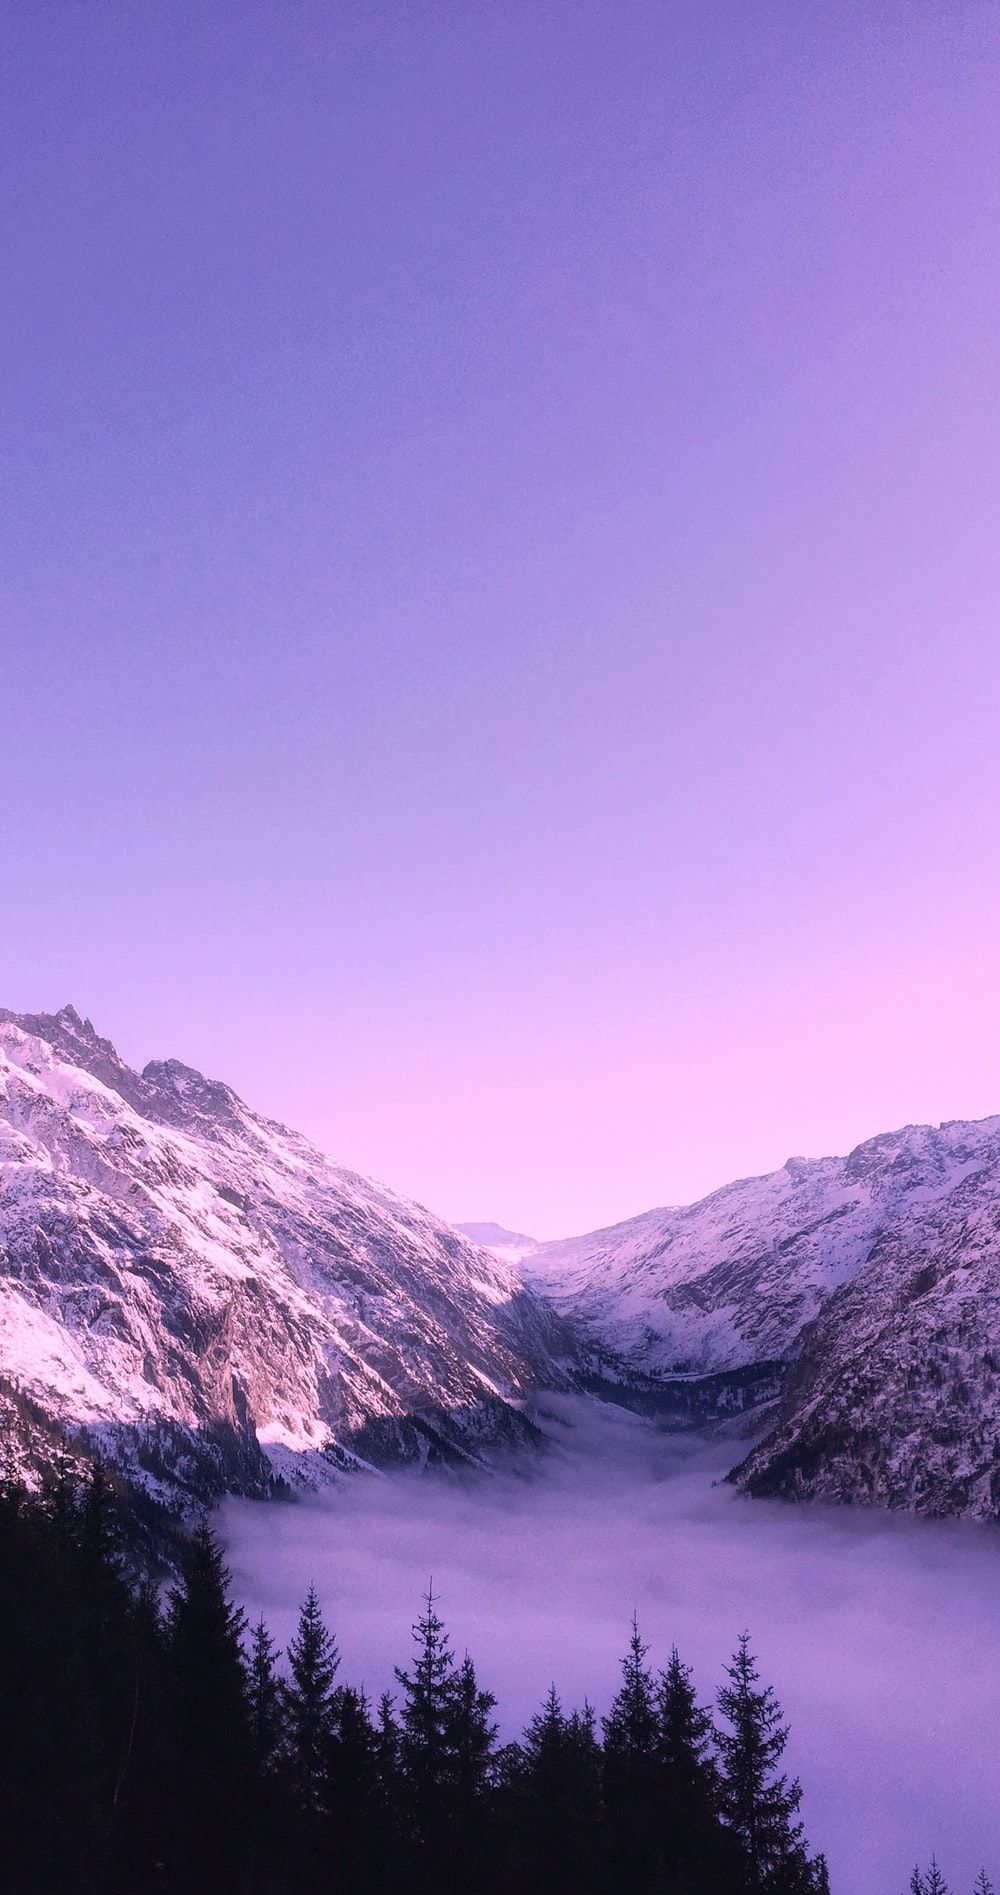 A purple and blue sunset over a snow covered mountain - Nature